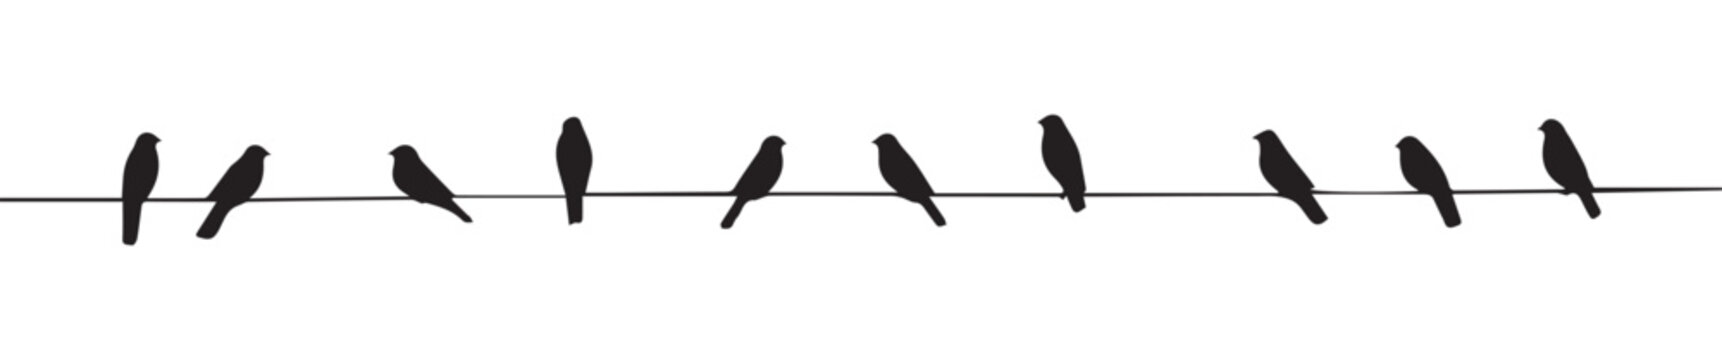 Birds silhouettes on power line wires. Vector on isolated background